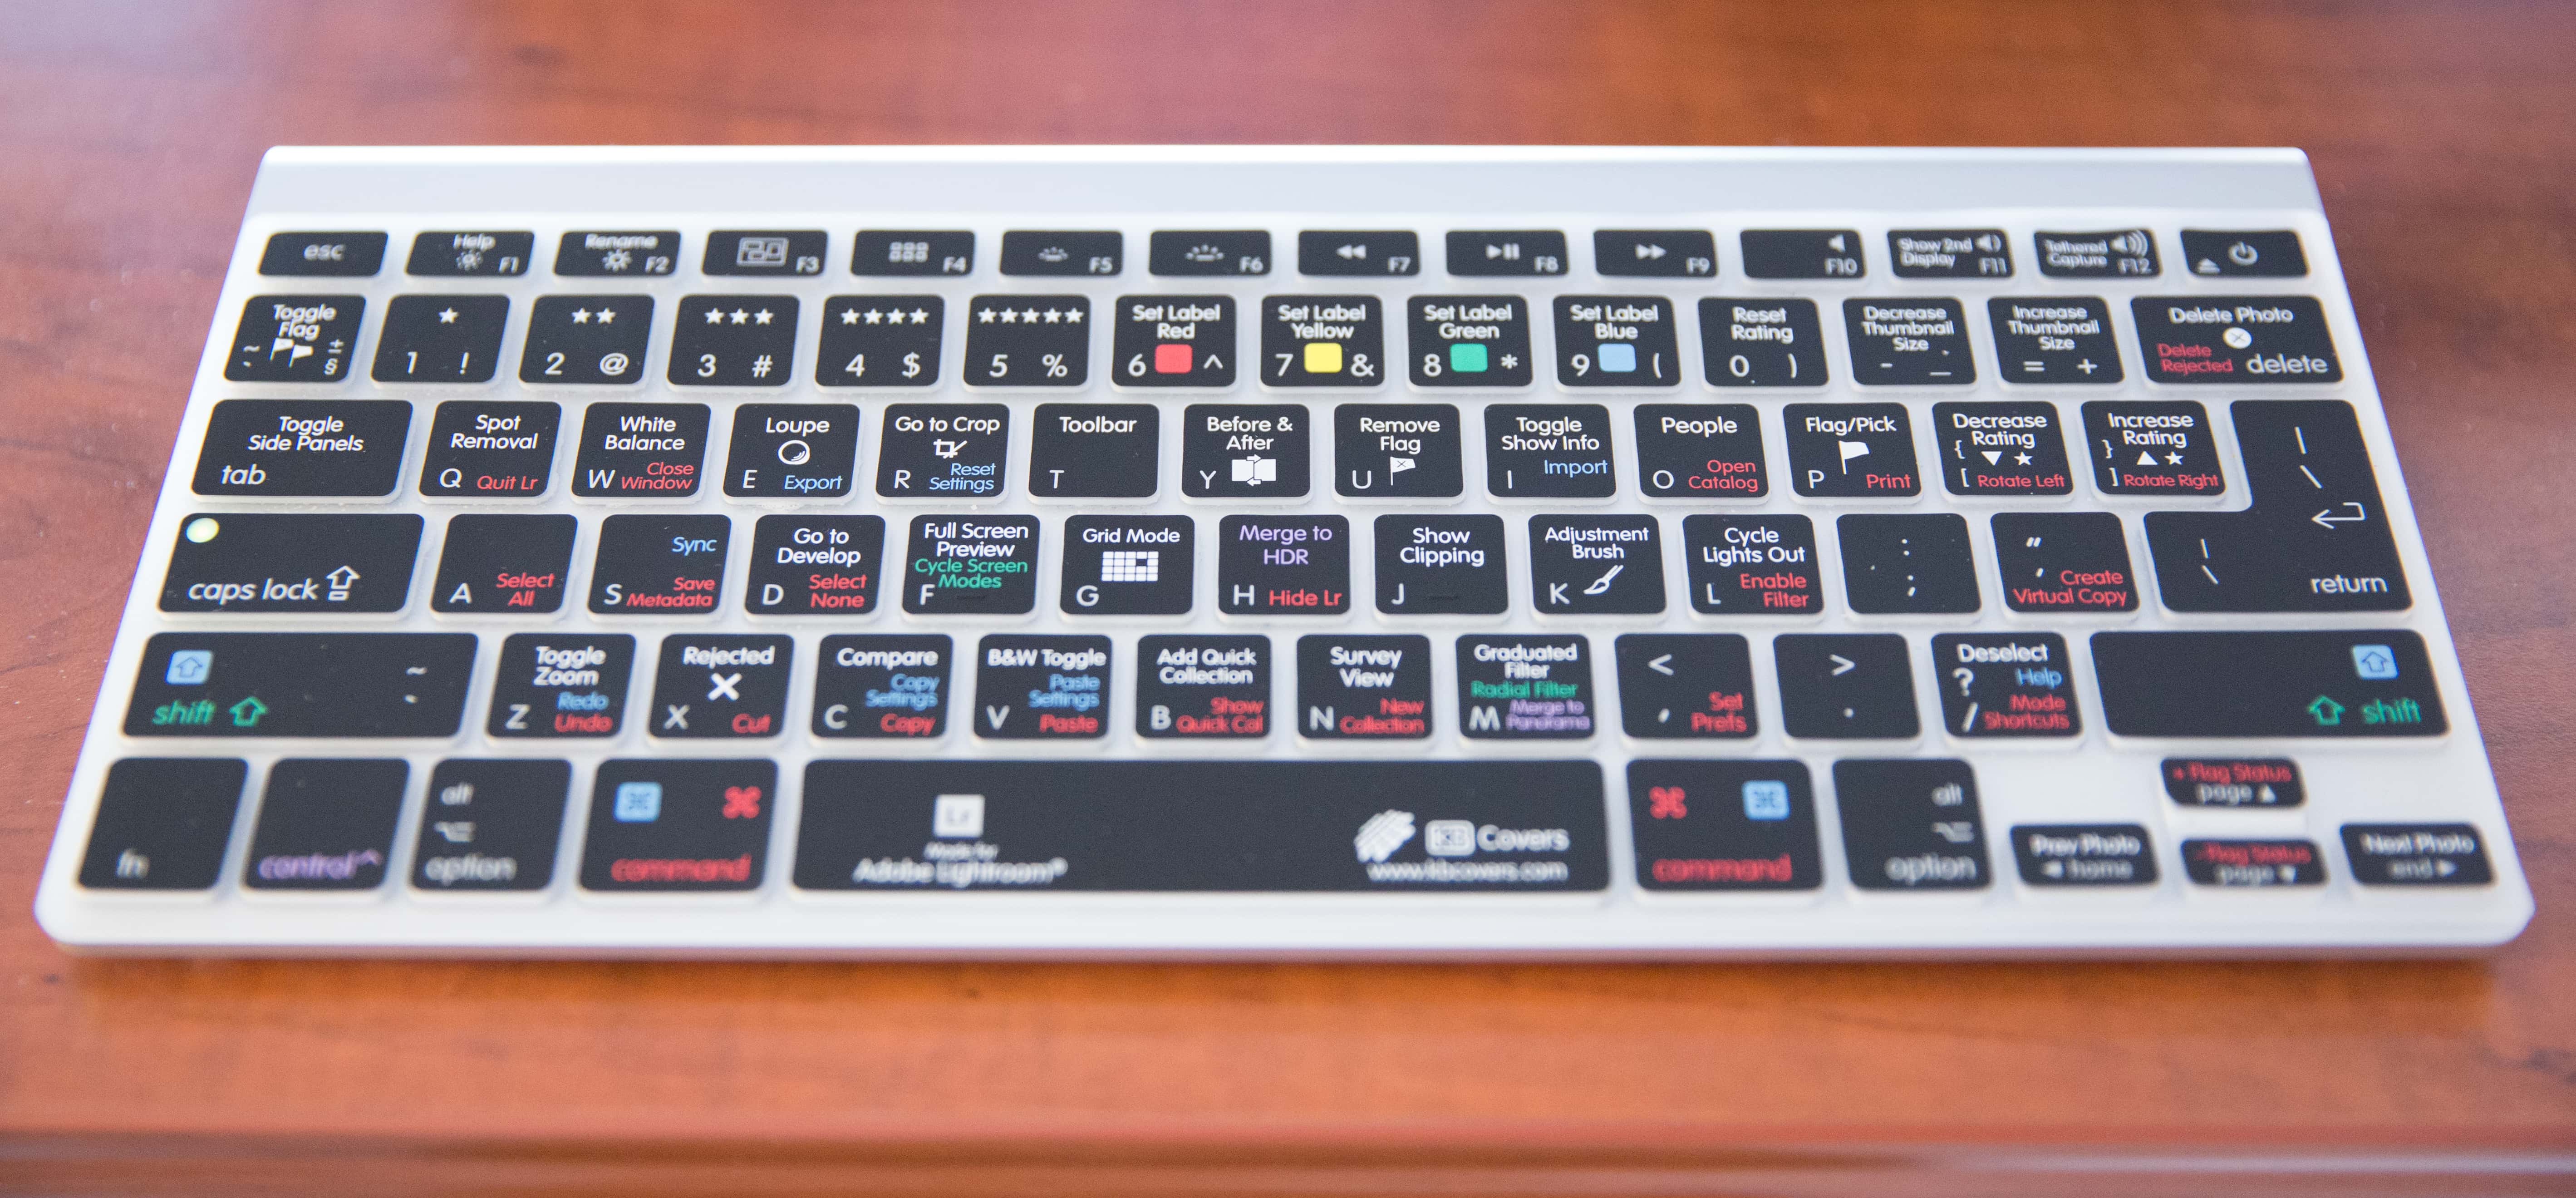 Keyboard accessory cover to help Lightroom users